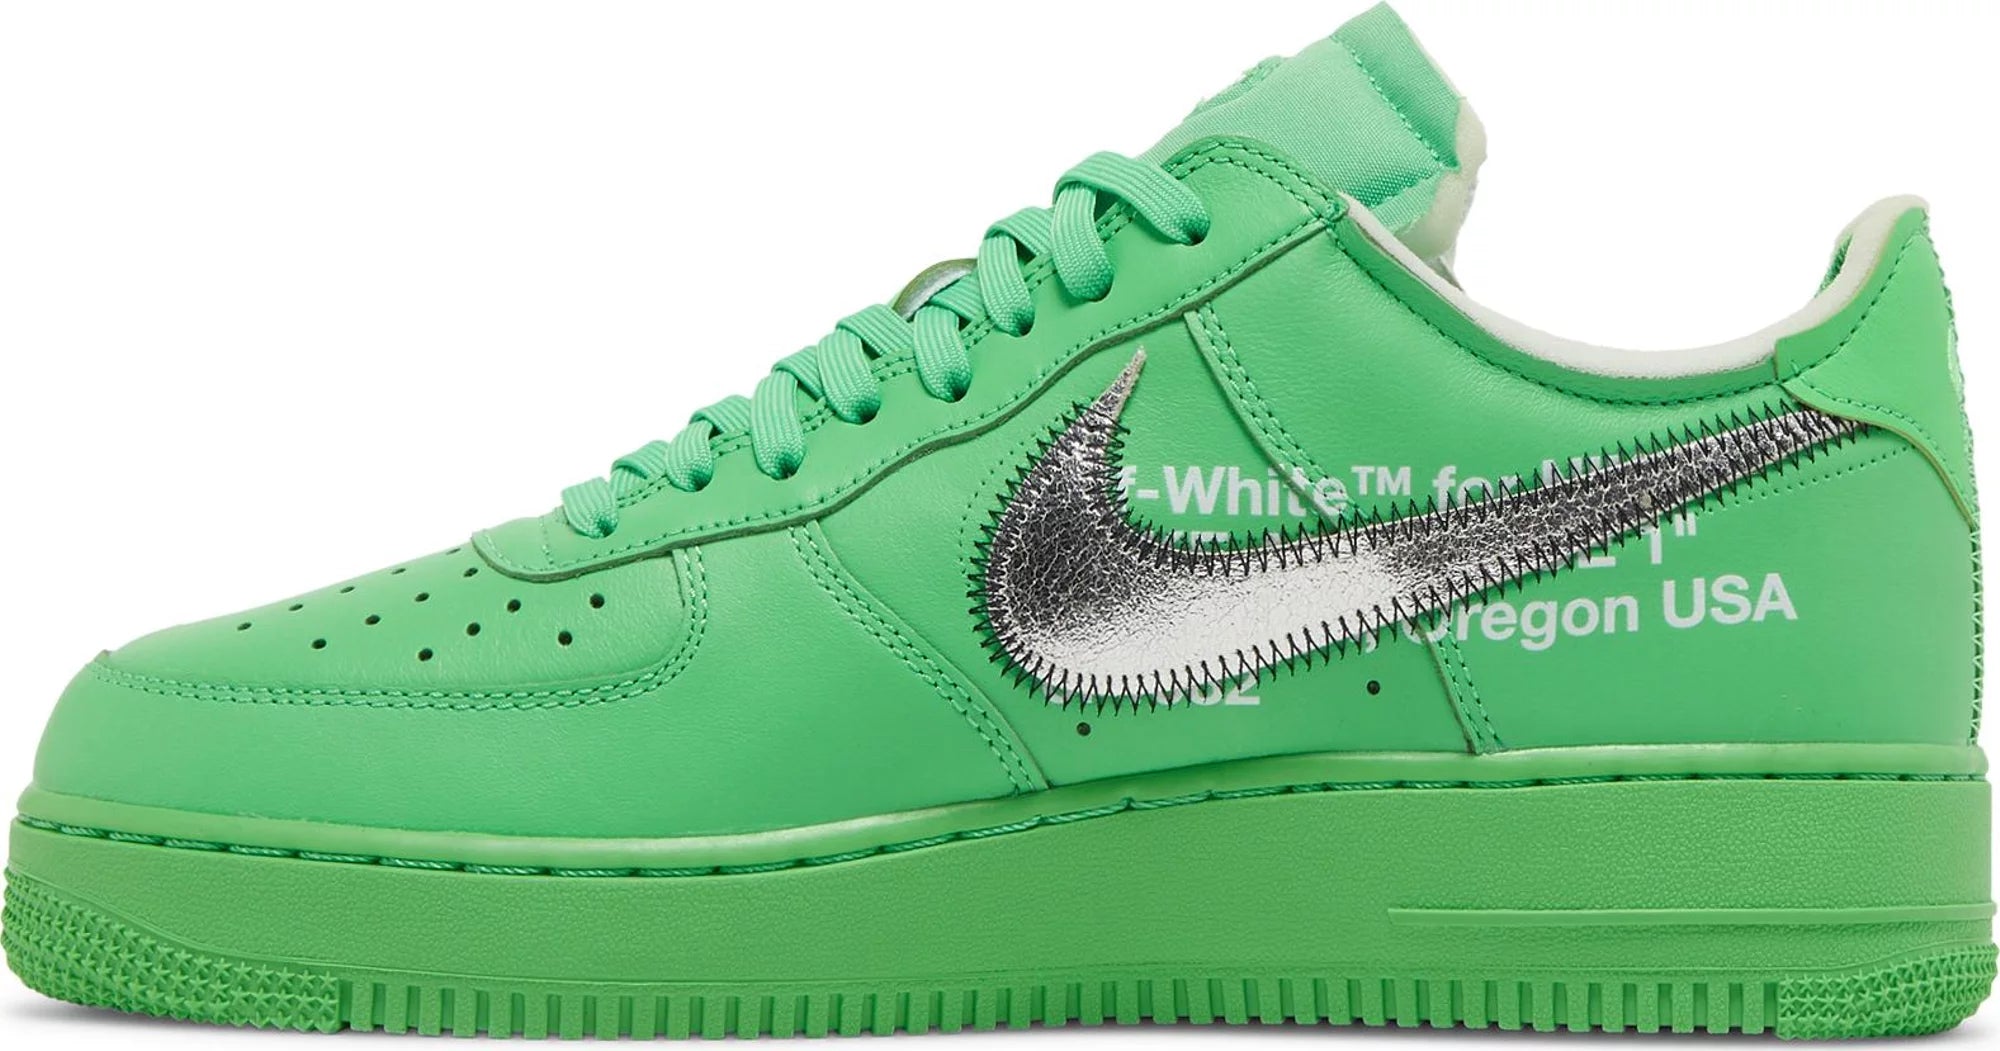 Private Selection on Instagram: Off White x Nike Air Force 1 Low “Green”  rumored to be releasing in partnership with the Brooklyn Museum this year.  What's your take on this green color